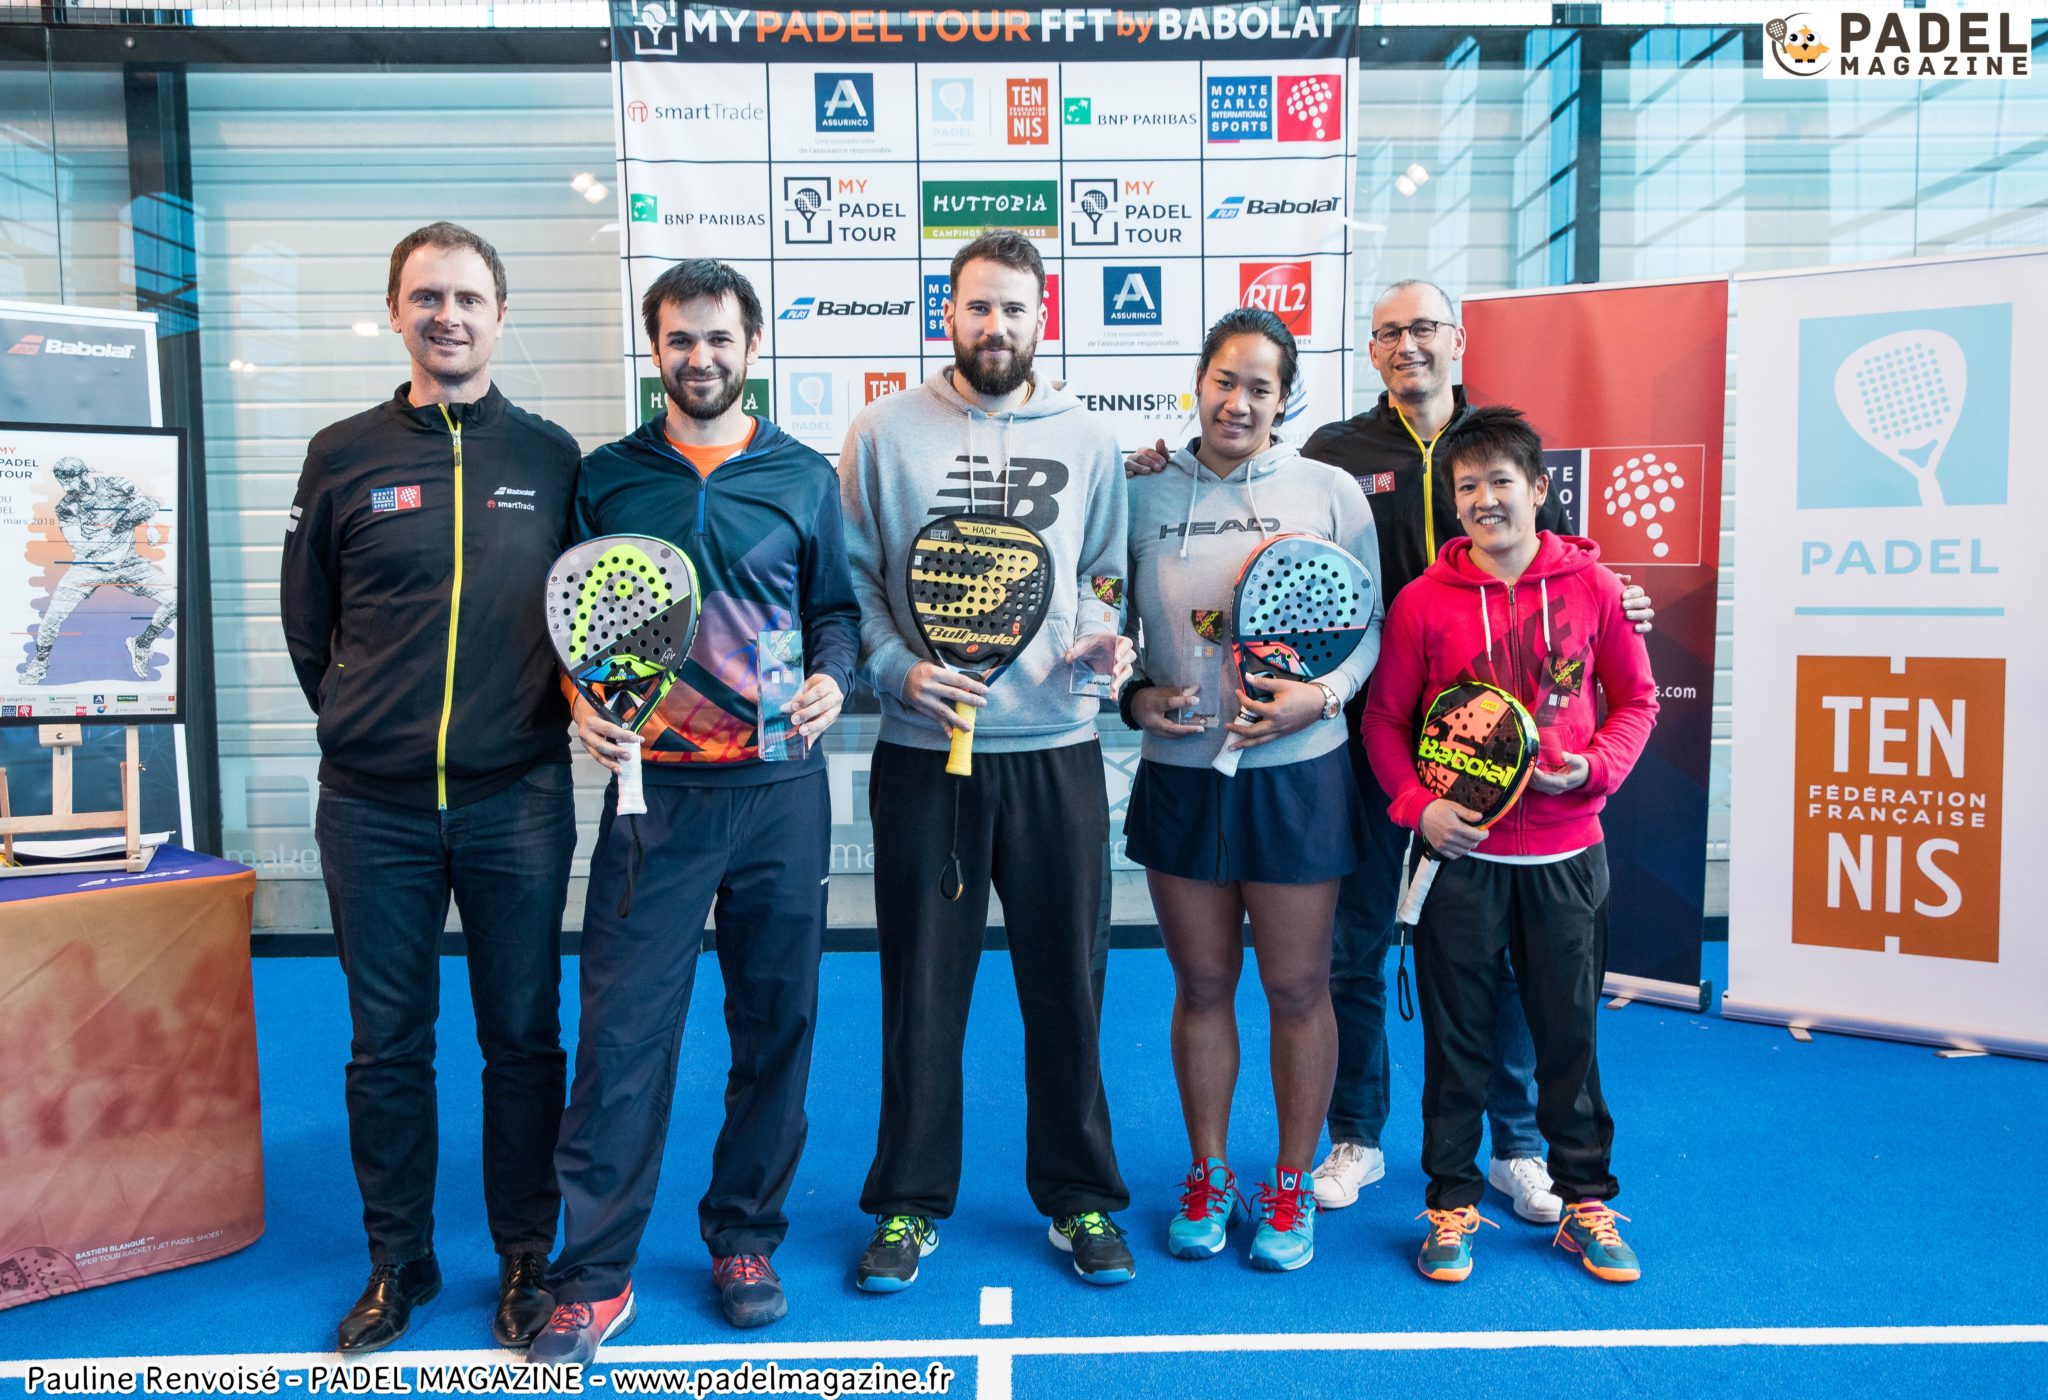 Vo / Godallier and Maigret / Tison: Winners of the 1st stage of the My Padel Tour 2018